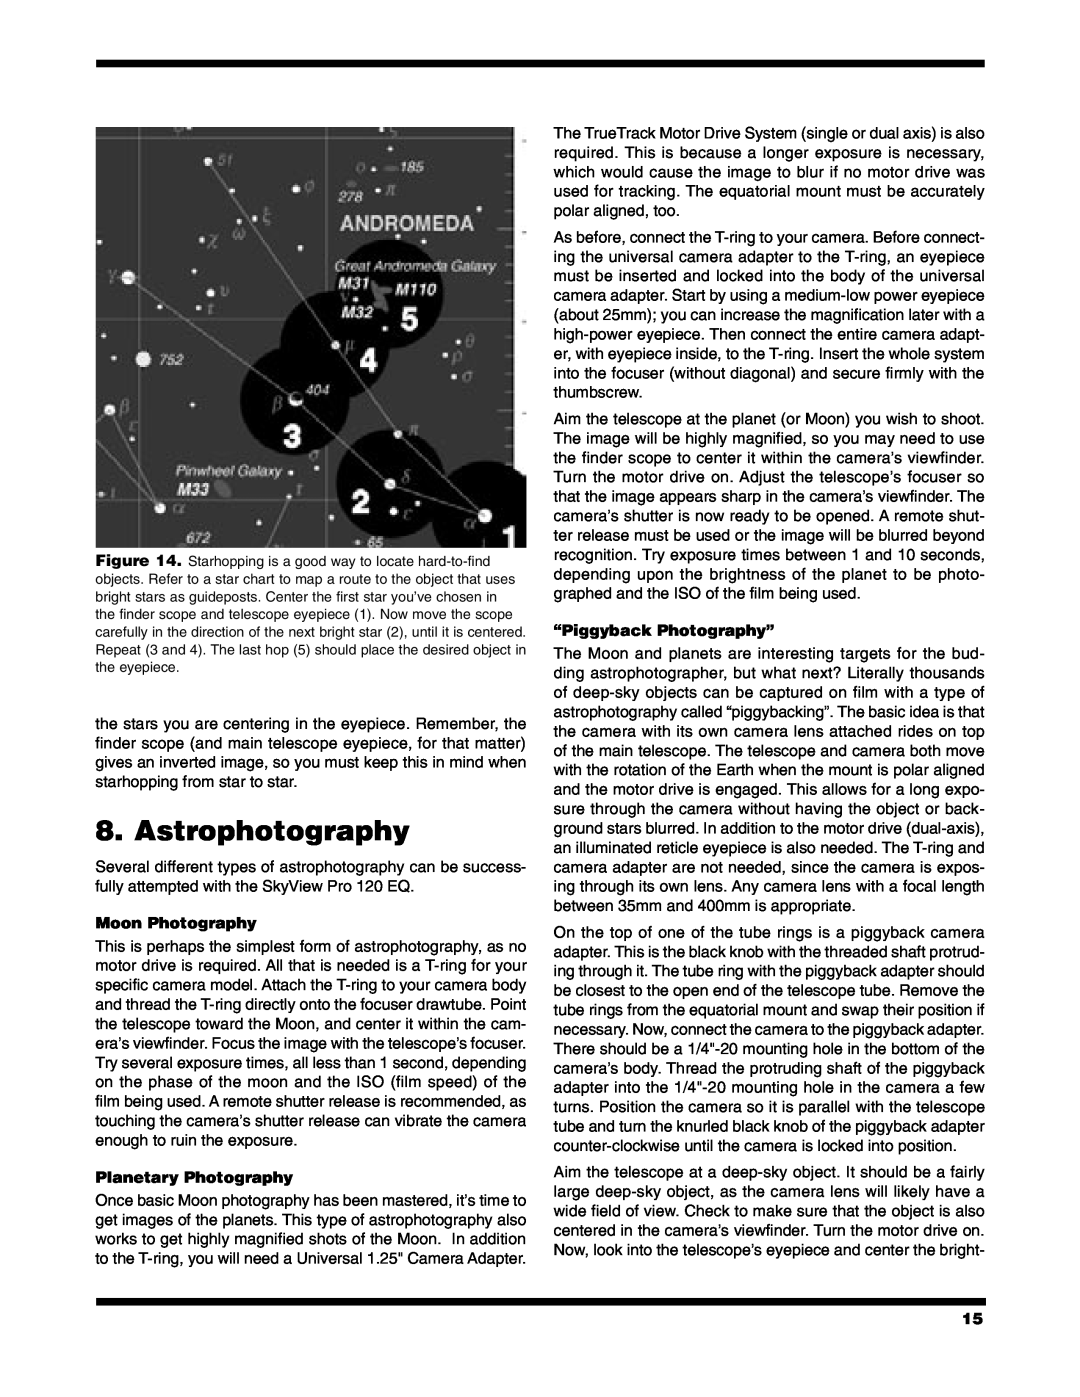 Orion PRO 120 EQ instruction manual Astrophotography, Moon Photography, Planetary Photography, “Piggyback Photography” 